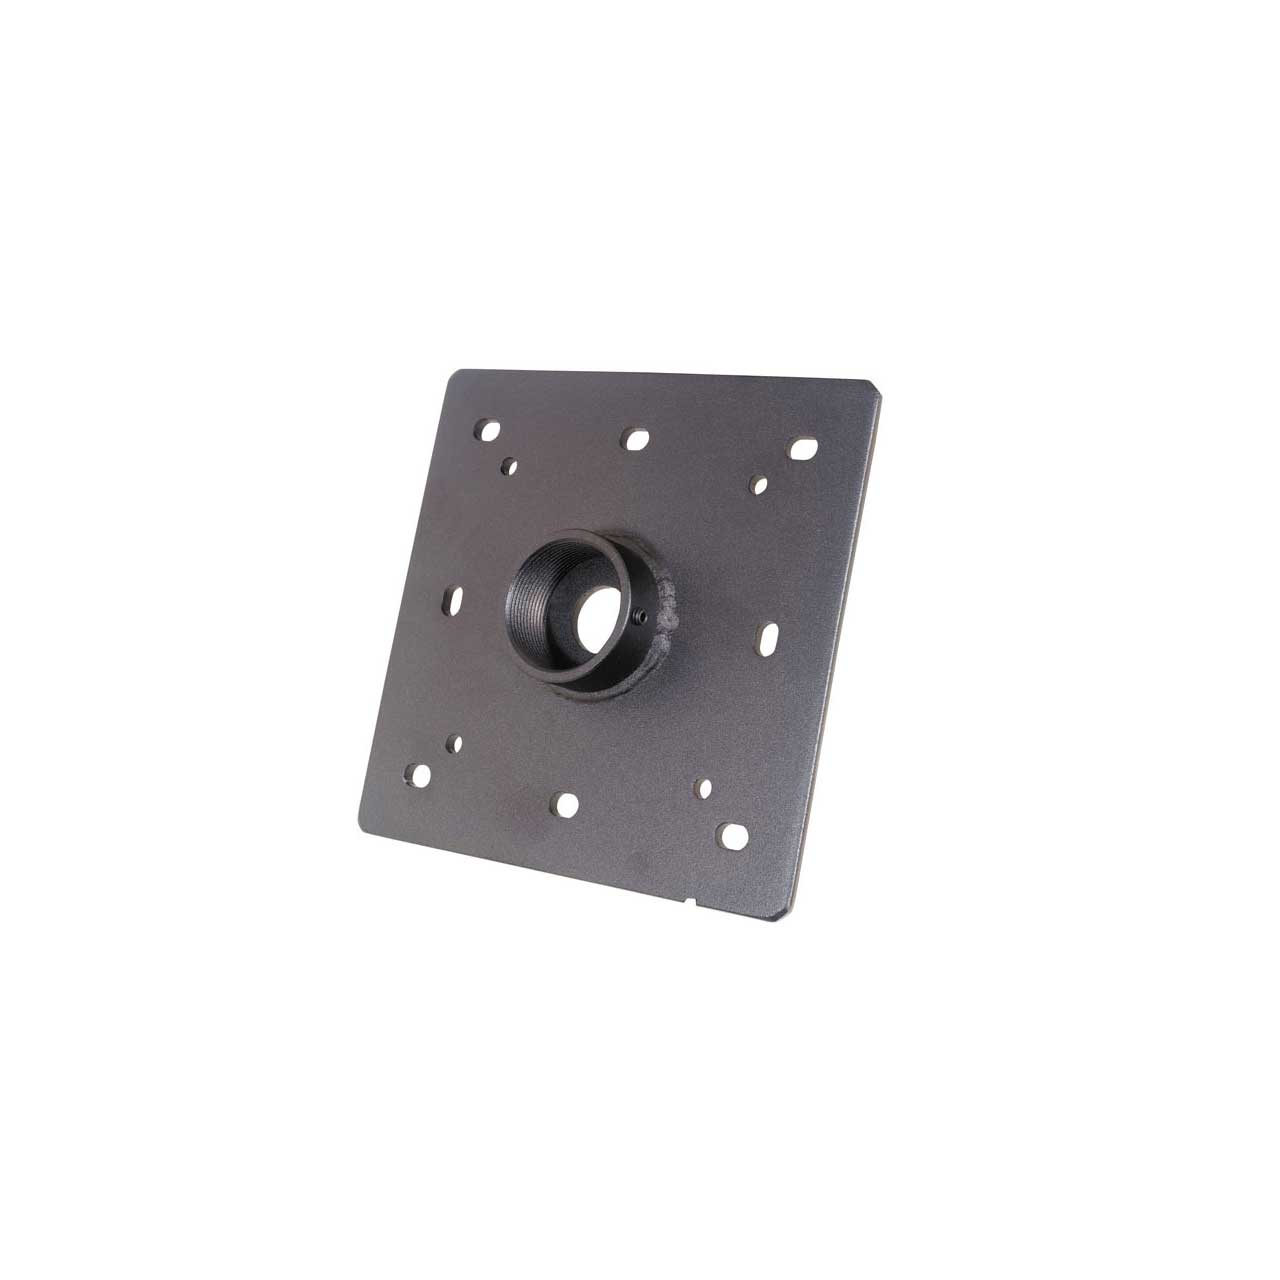 Universal TV Mount Ceiling Flange for 1.5 Inch NPT Pipe